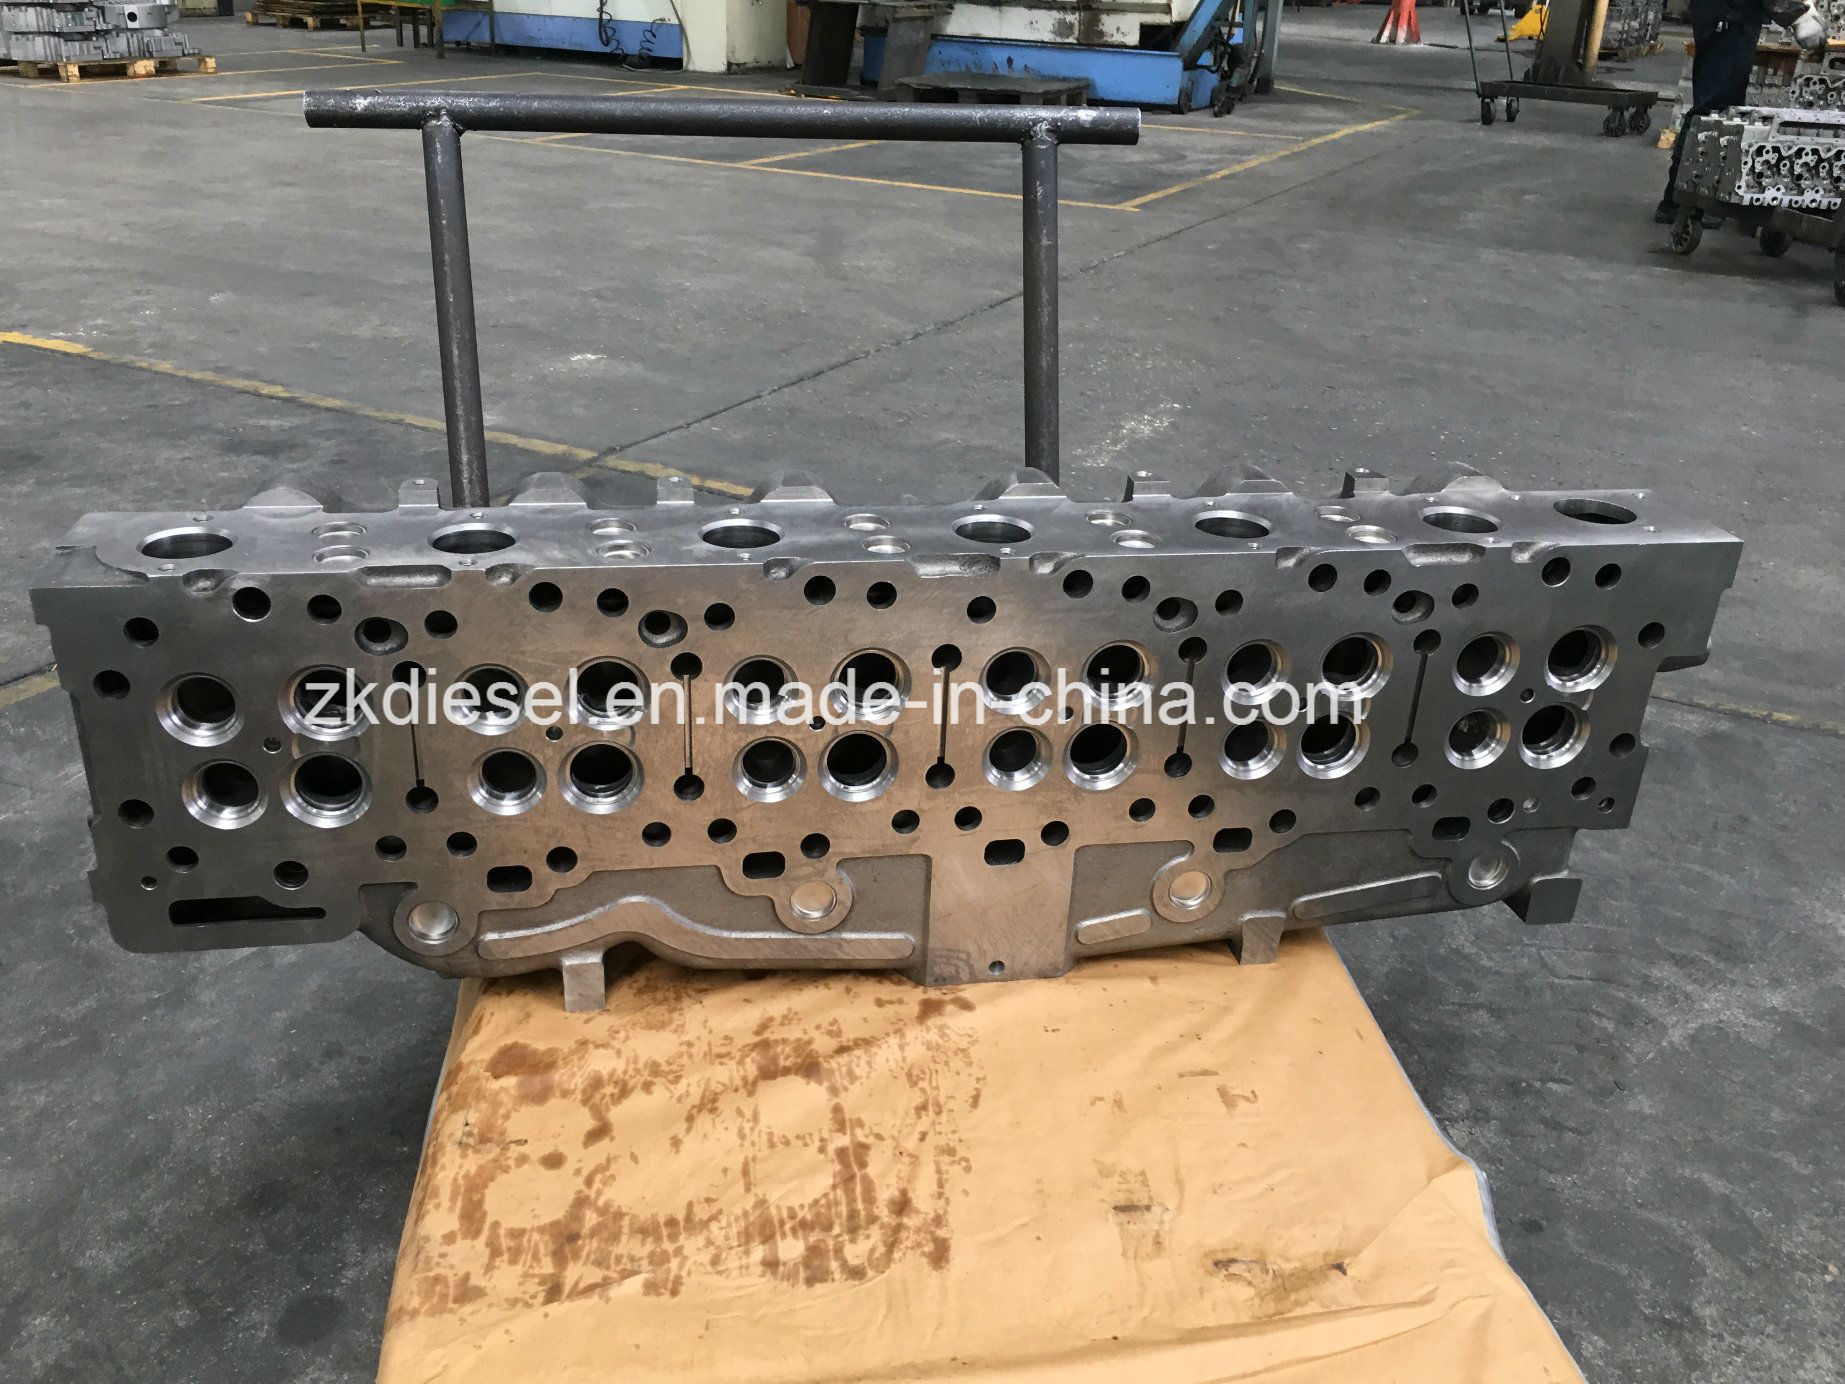 Cat C15 Cylinder Head Acert with Twin Turbo for on & off Highway Heavy Duty Truck